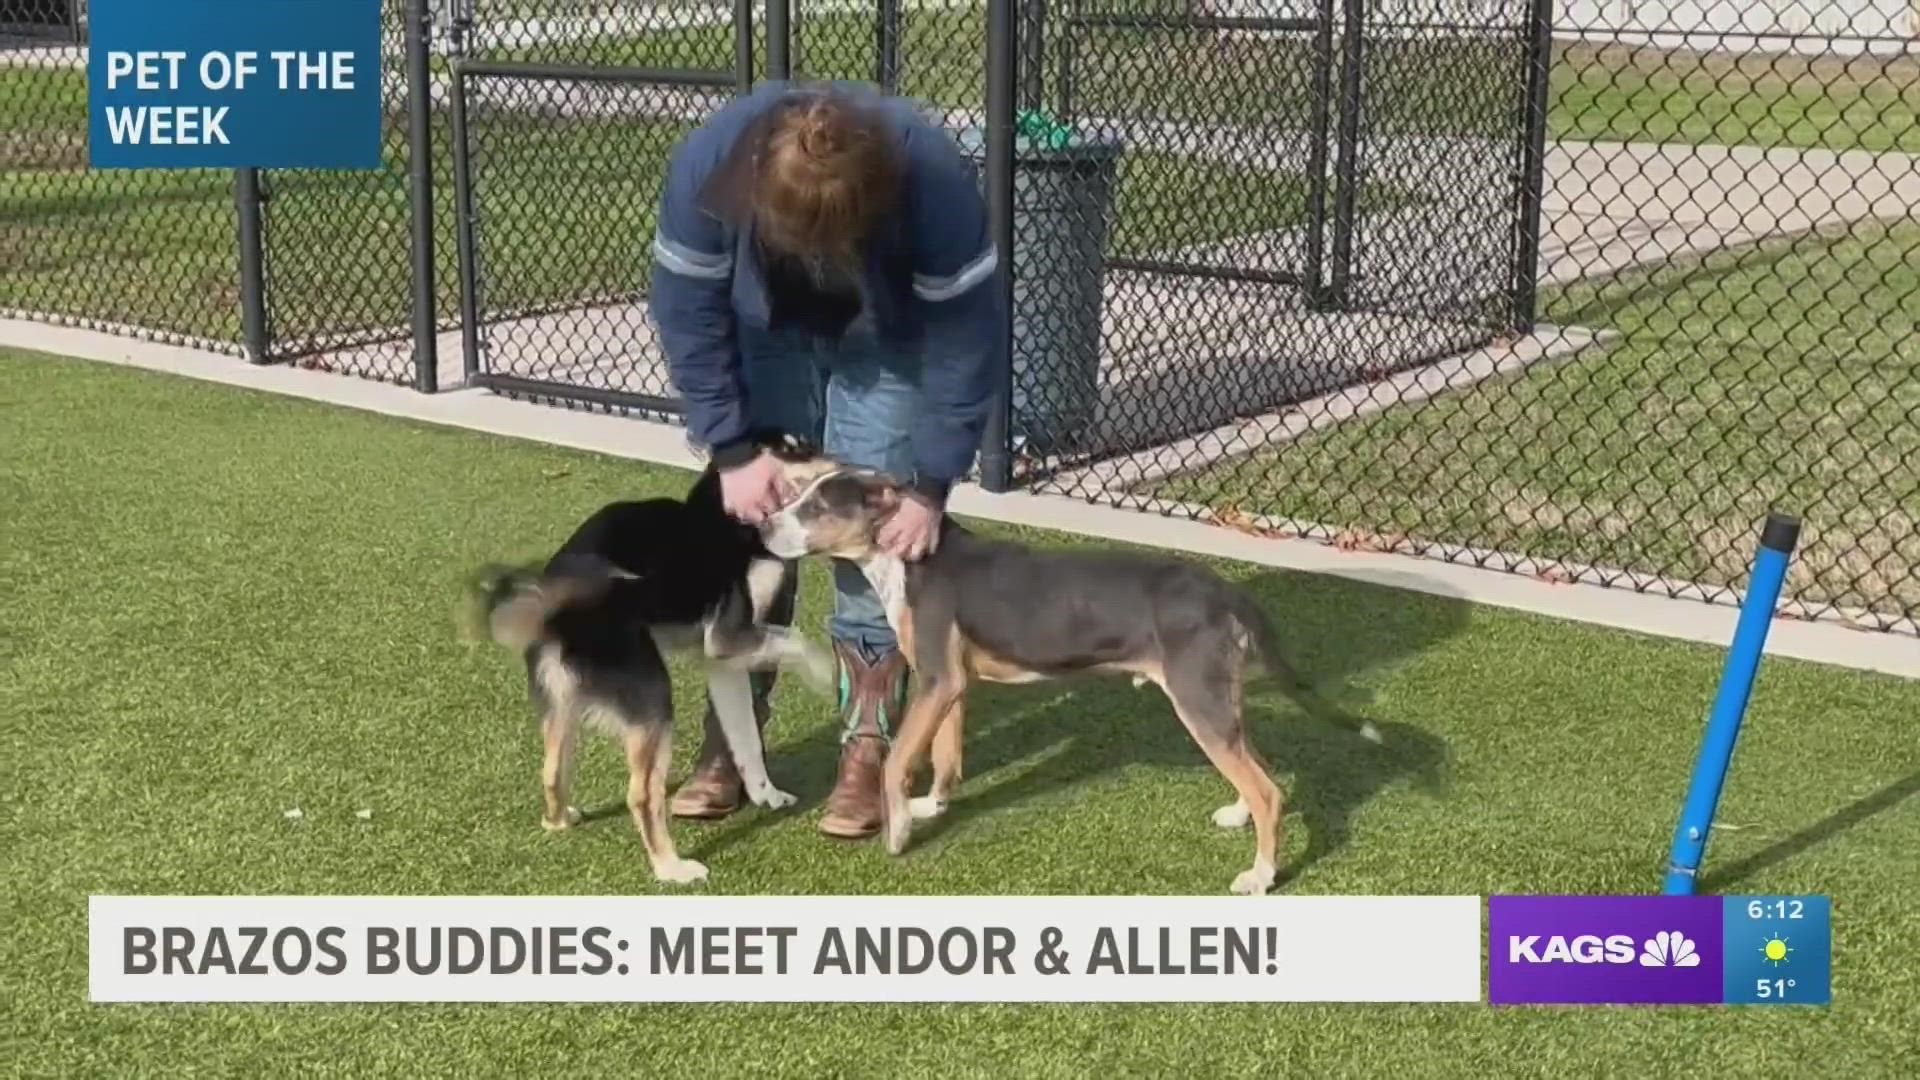 This week's featured Brazos Buddies are Allen and Andor, two young pups that are looking to be adopted.